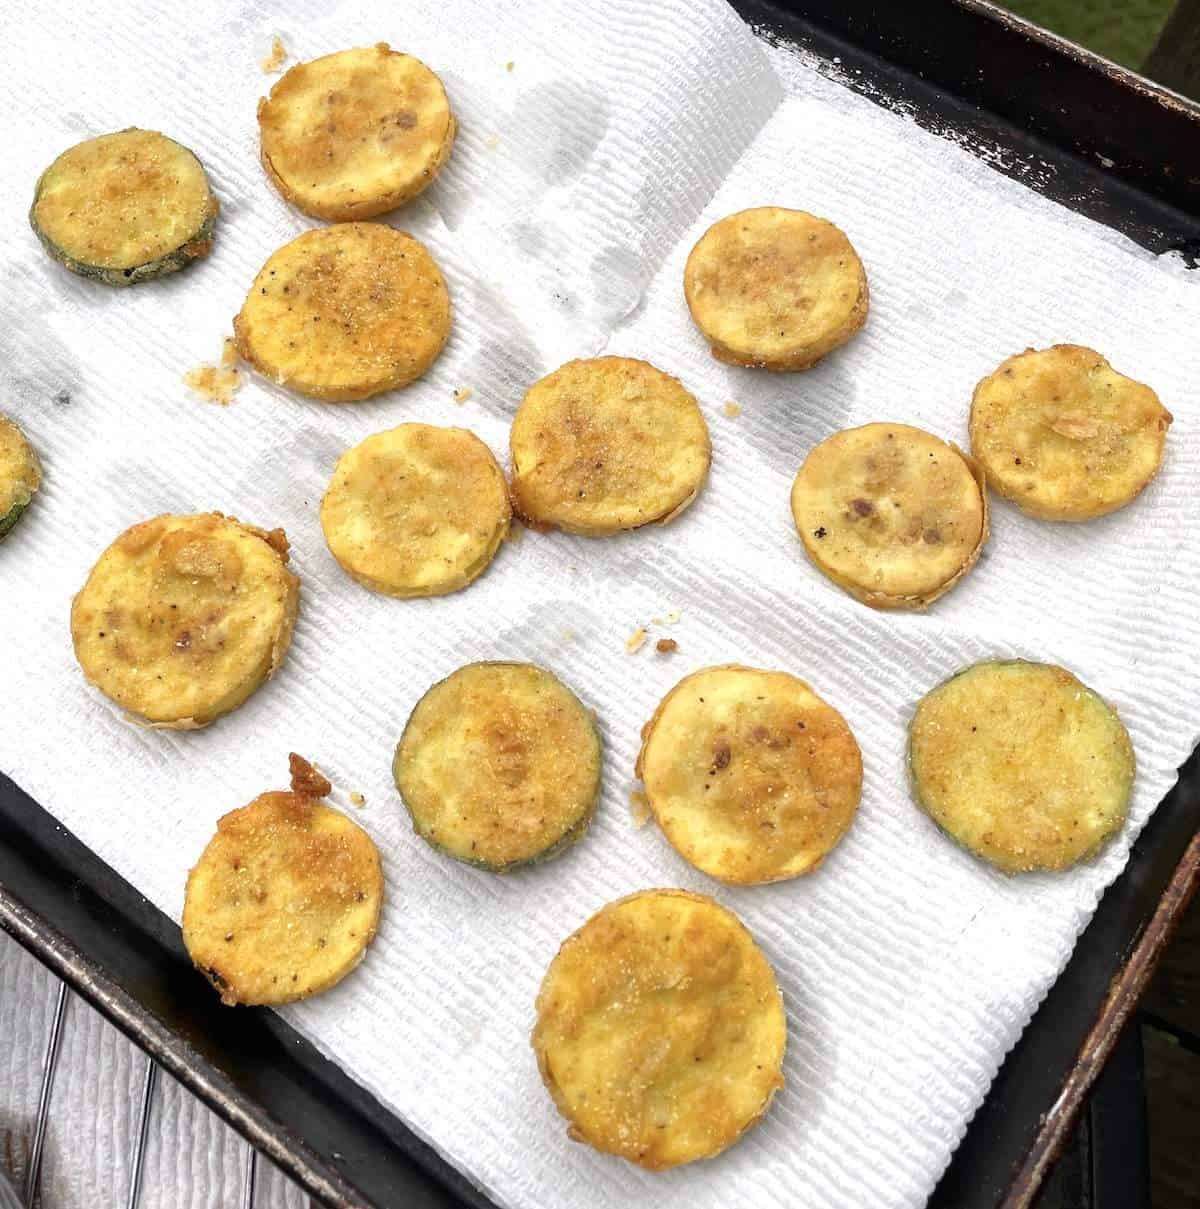 Fried squash and zucchini slices draining on a paper towel on a cookie sheet.